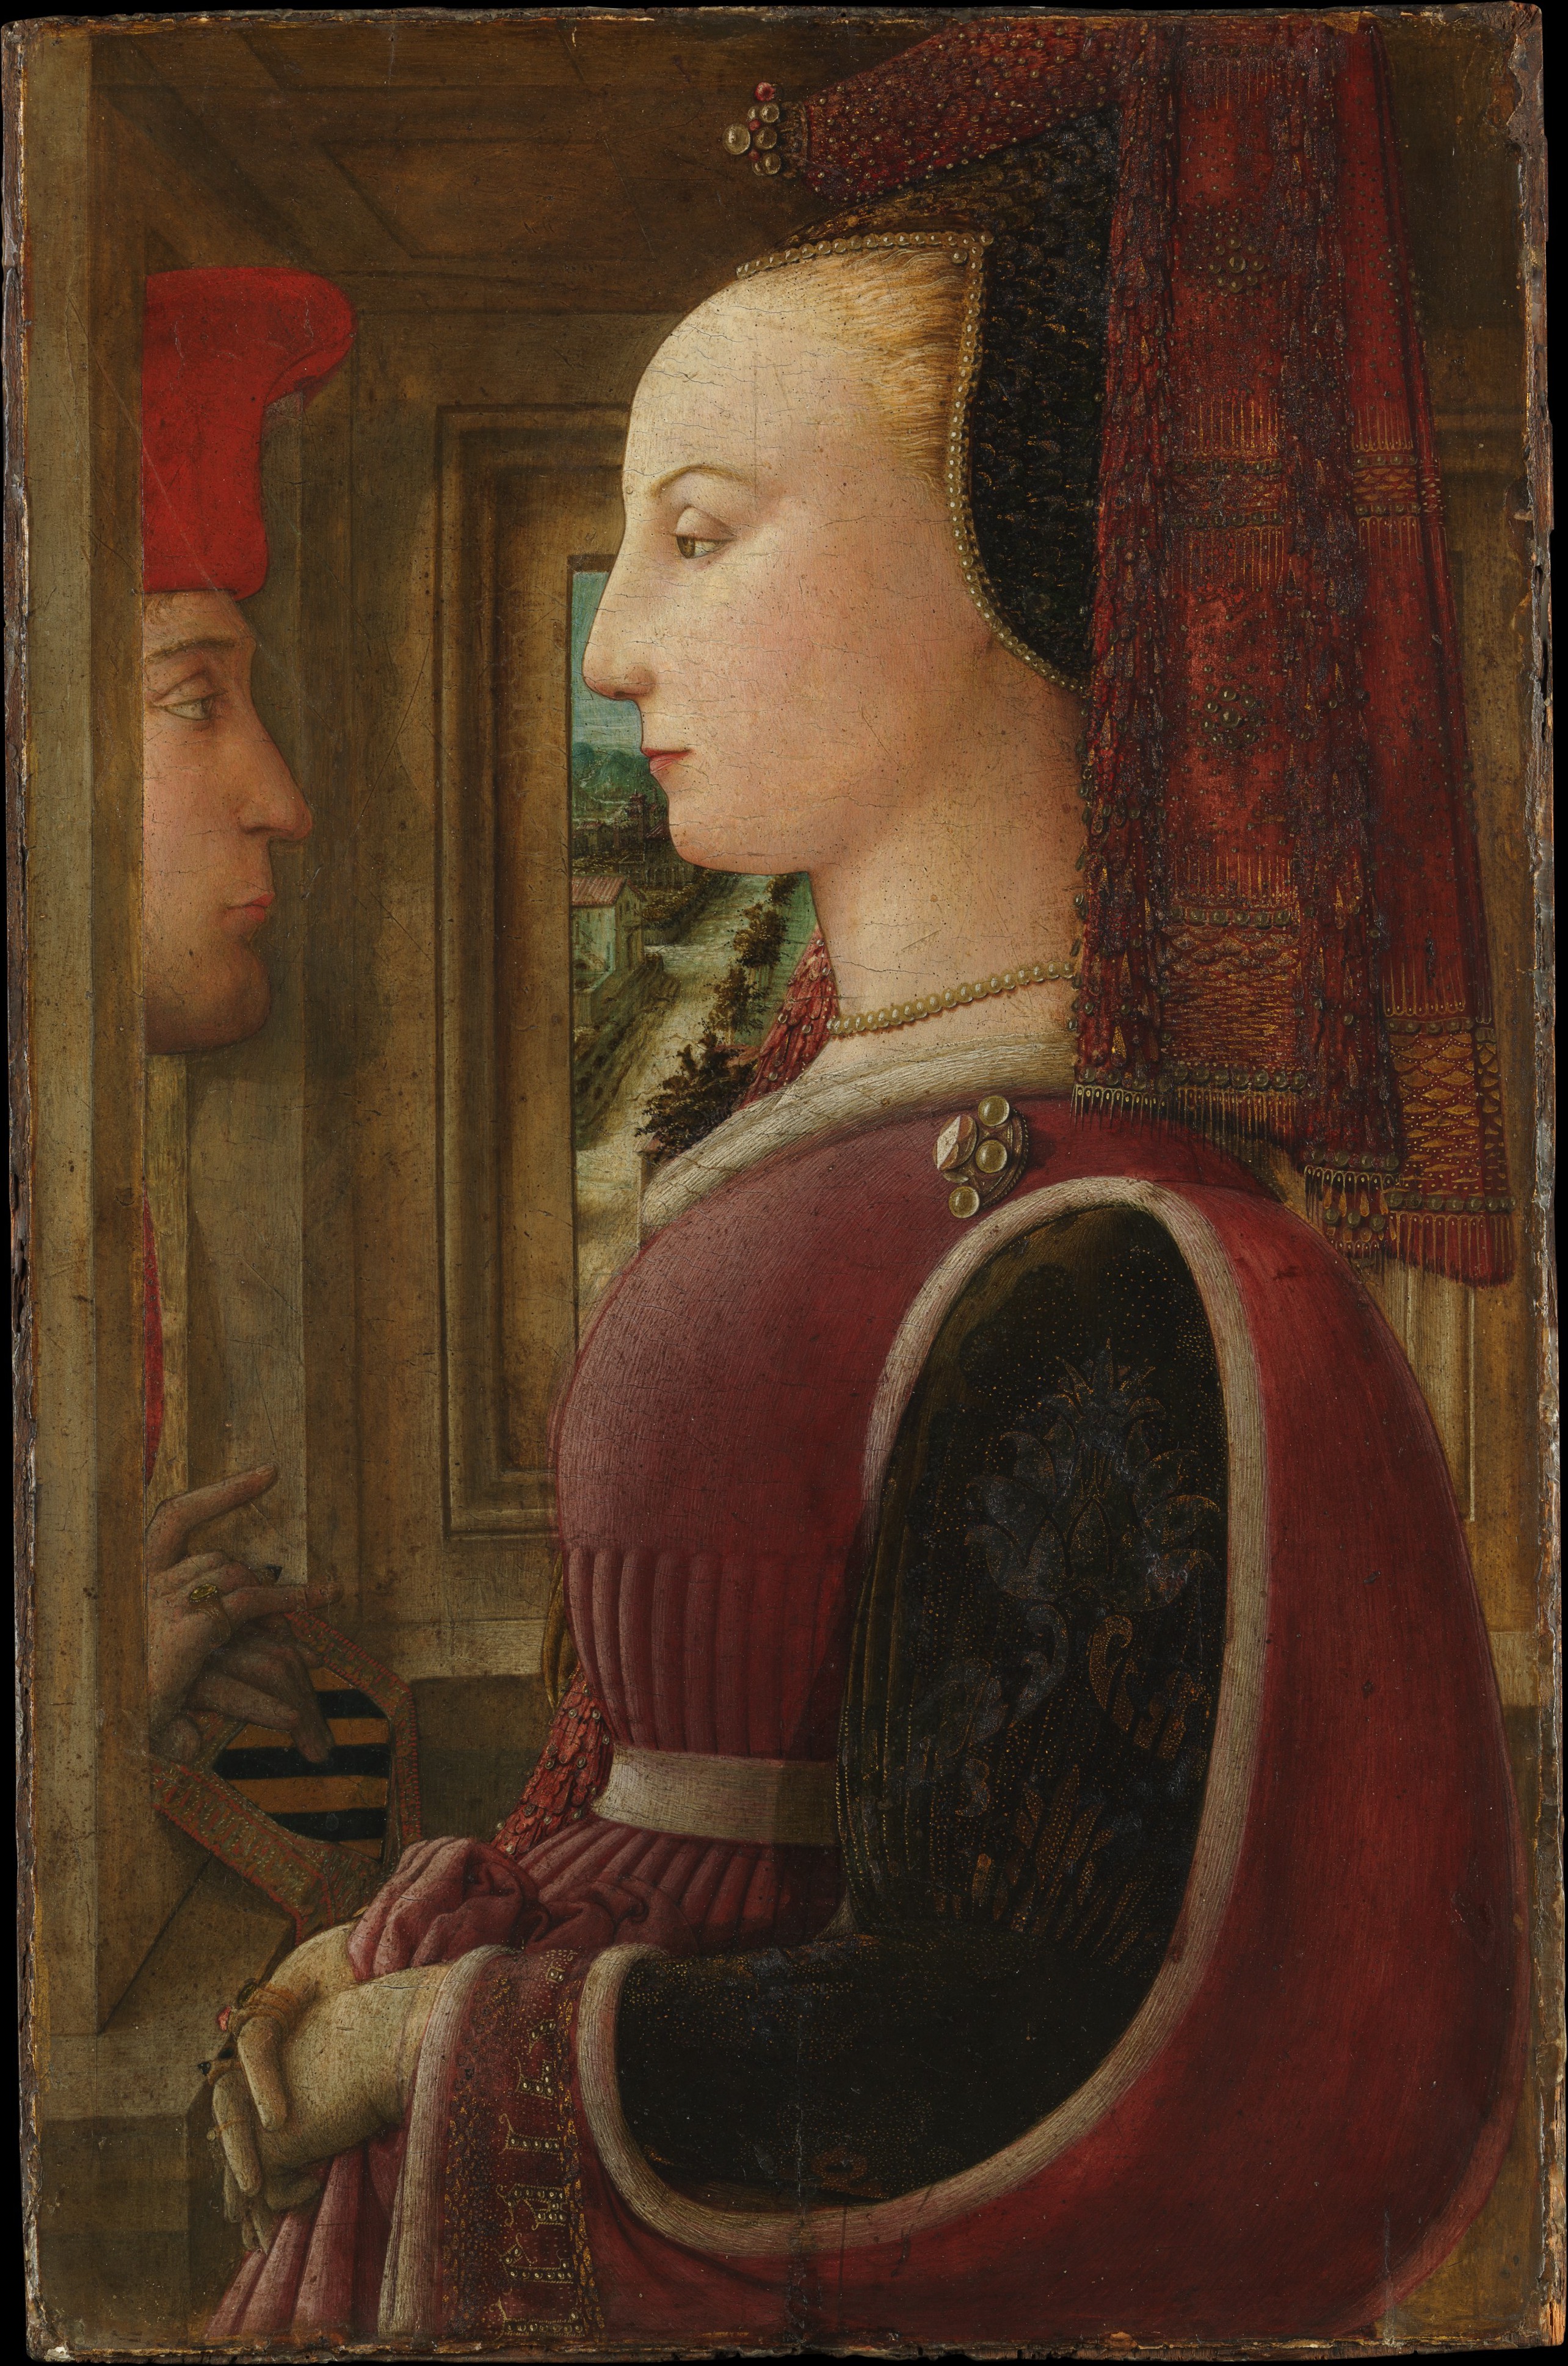 Portrait of a Woman with a Man at a Casement by Fra Filippo Lippi - ca. 1440 - 64.1 x 41.9 cm Metropolitan Museum of Art